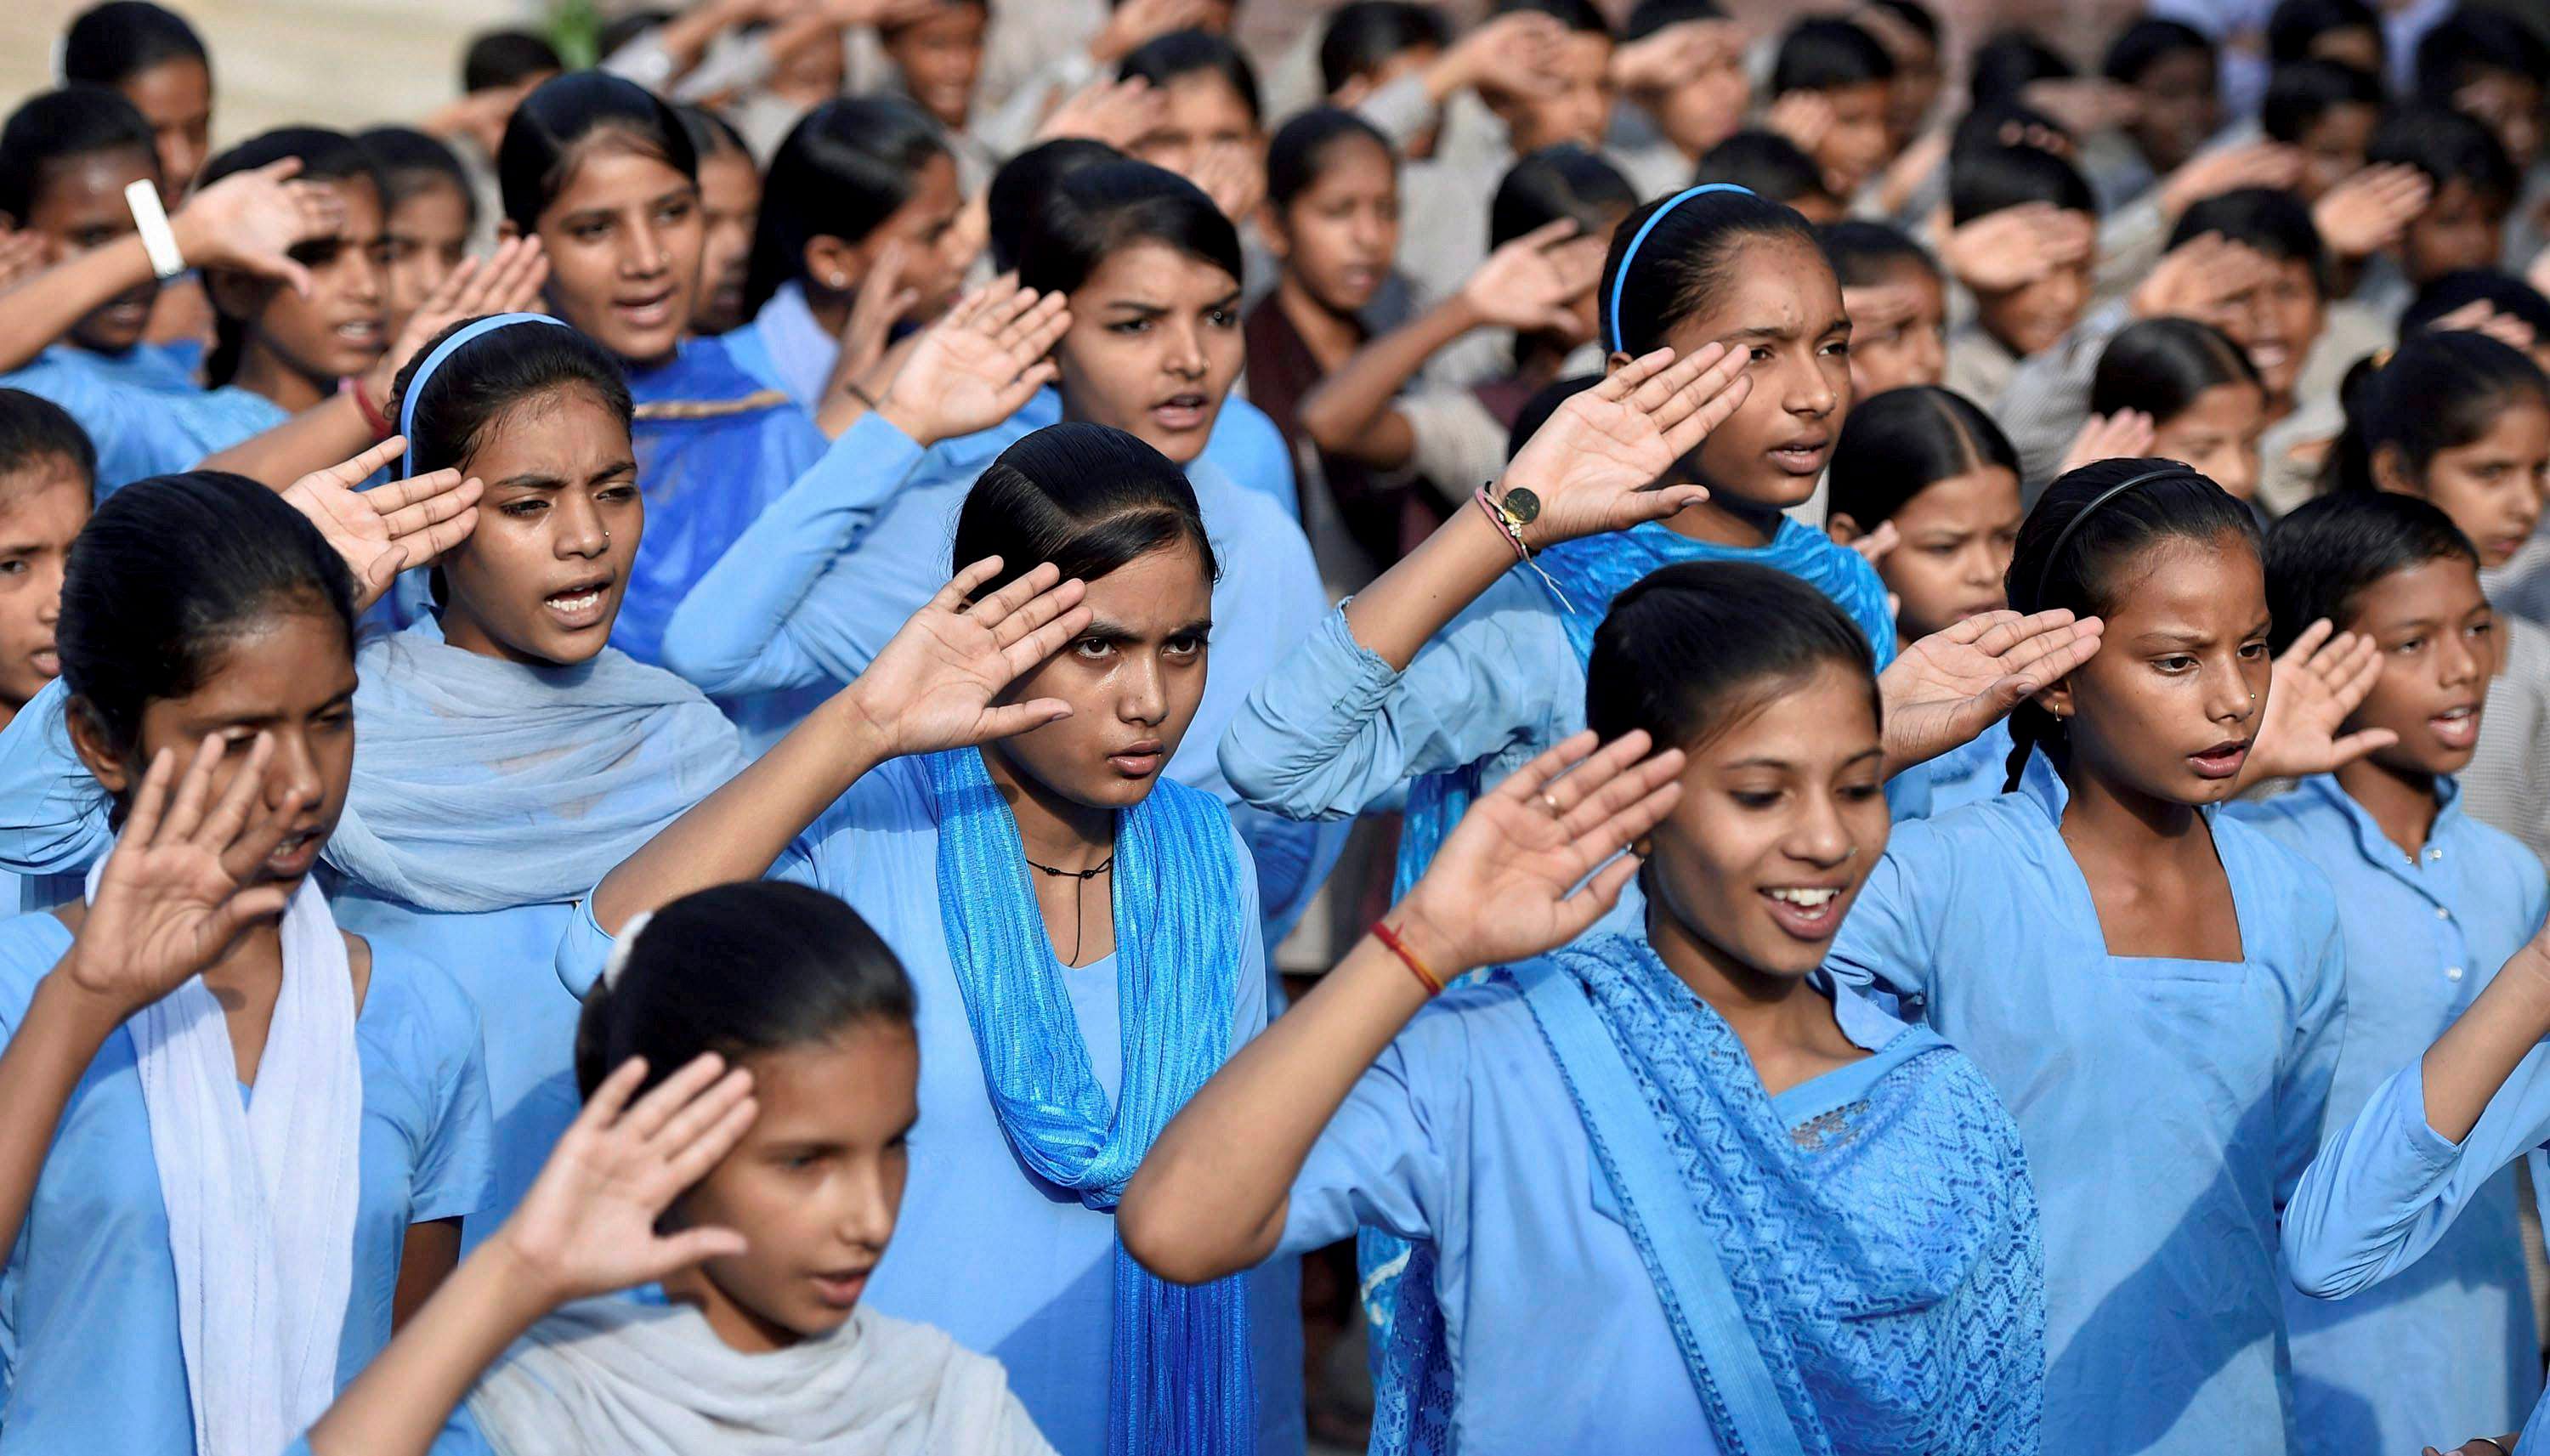 A directive has been issued to 1.22 lakh government schools and more than 35,000 private schools in Madhya Pradesh to ensure that students say 'Jai Hind' during the roll call. PTI file photo